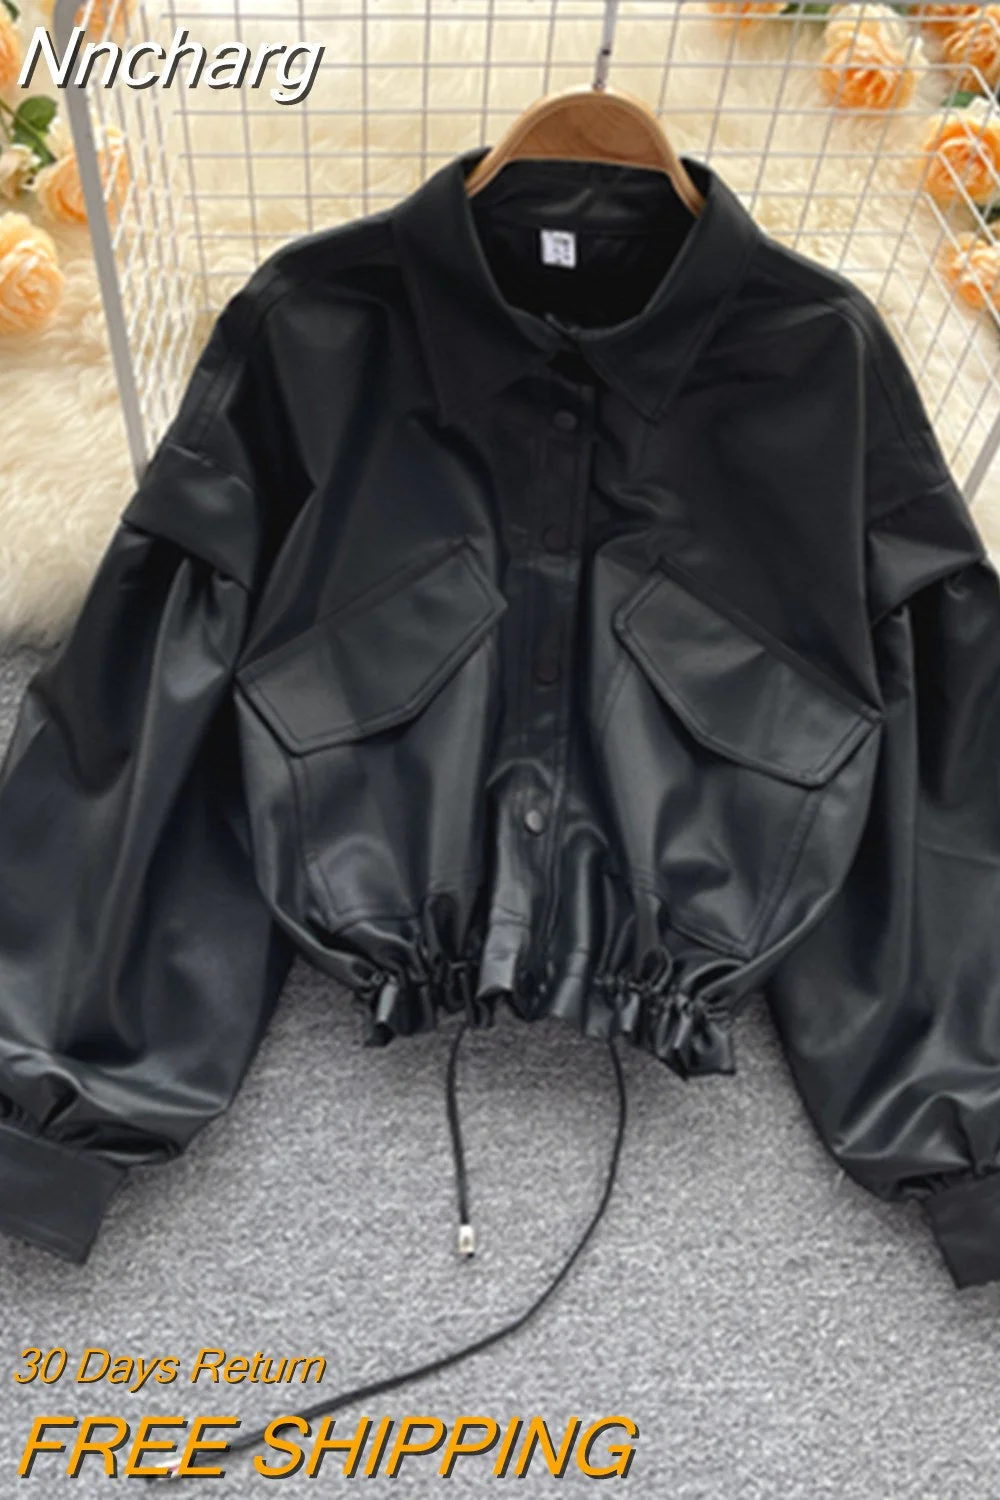 Nncharge New Spring Autumn Women Streetwear Single Breasted Motorcycle Pu Coat Lady Fashion Loose Drawstring Faux Leather Jacket